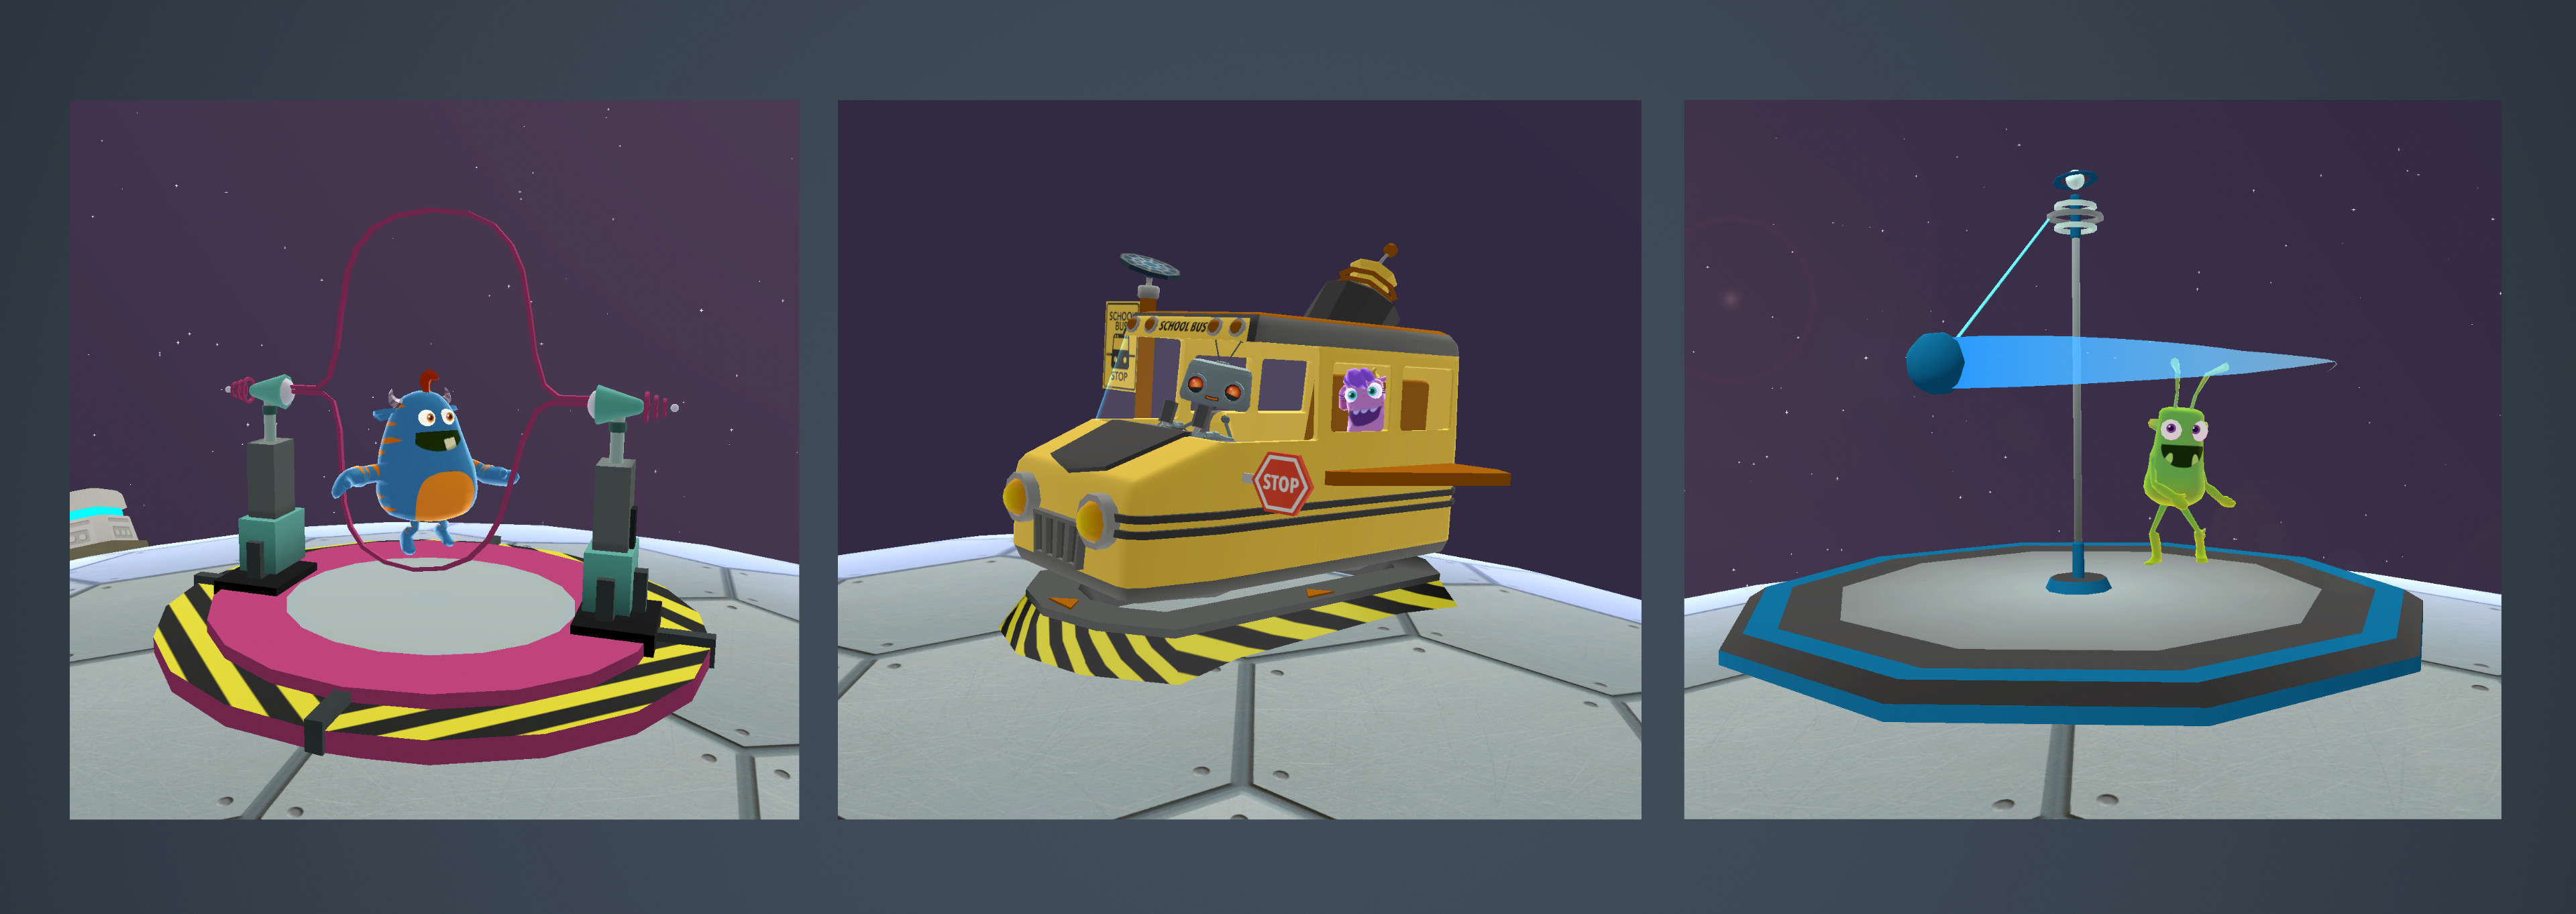 Back To School props for Starbase MathTango: binary double jumper, cosmic school bus, and the atomic tether ball